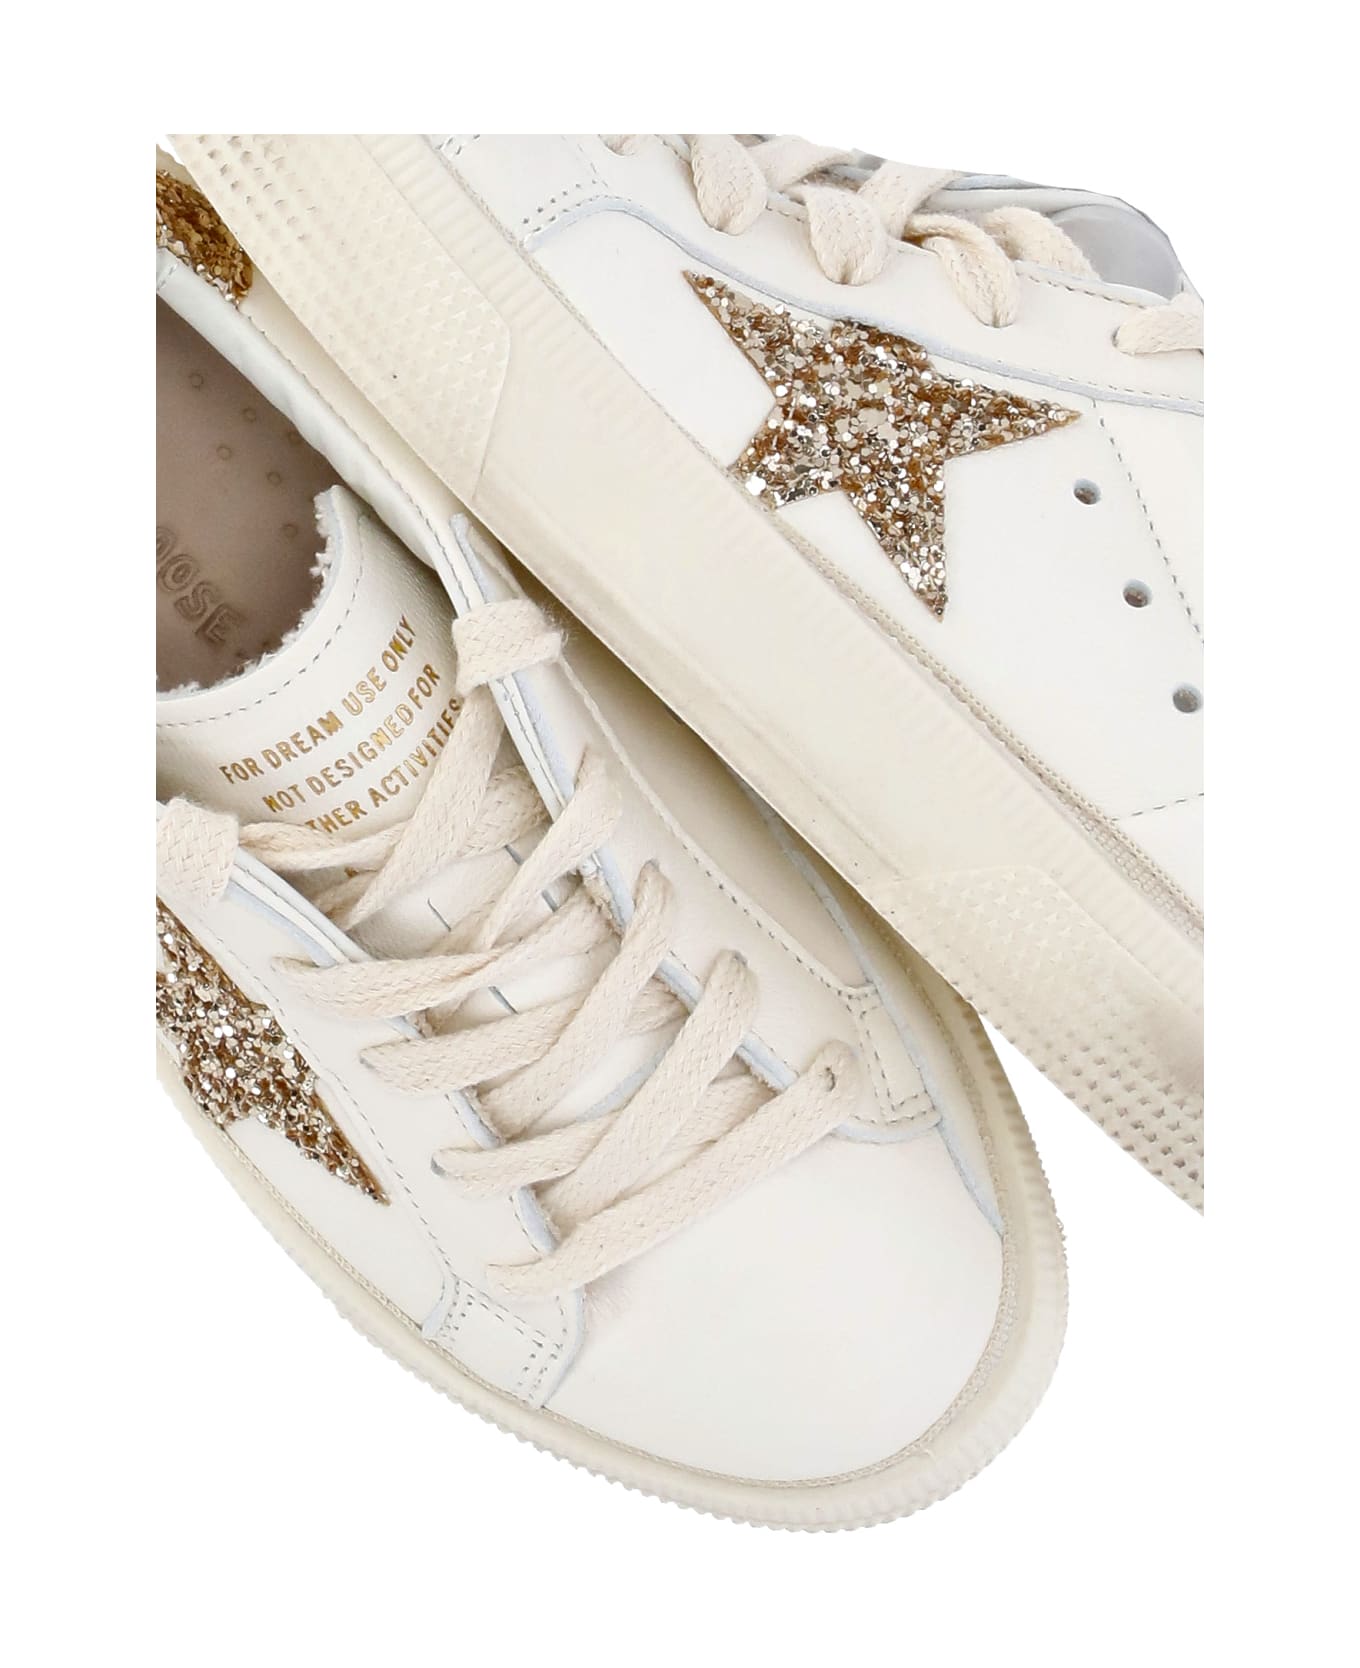 Golden Goose May Sneakers - White